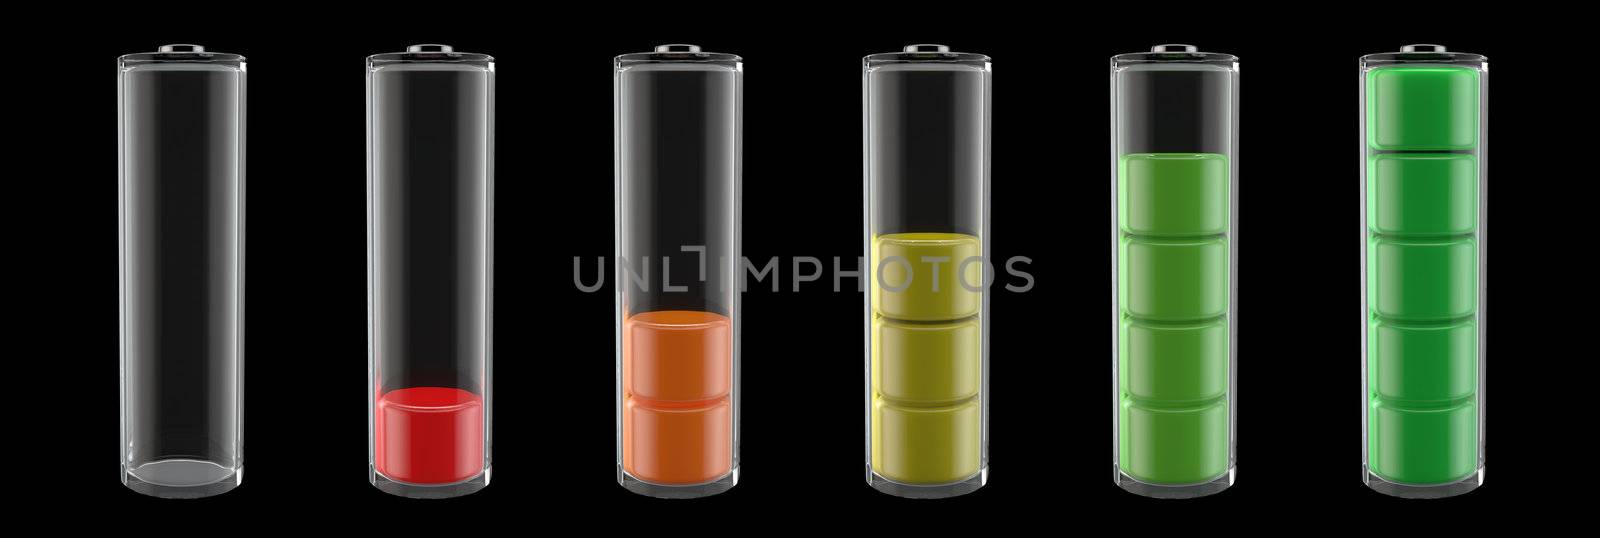 transparent batteries with six different charge levels from 0% to 100%, red, orange, yellow, green - black background